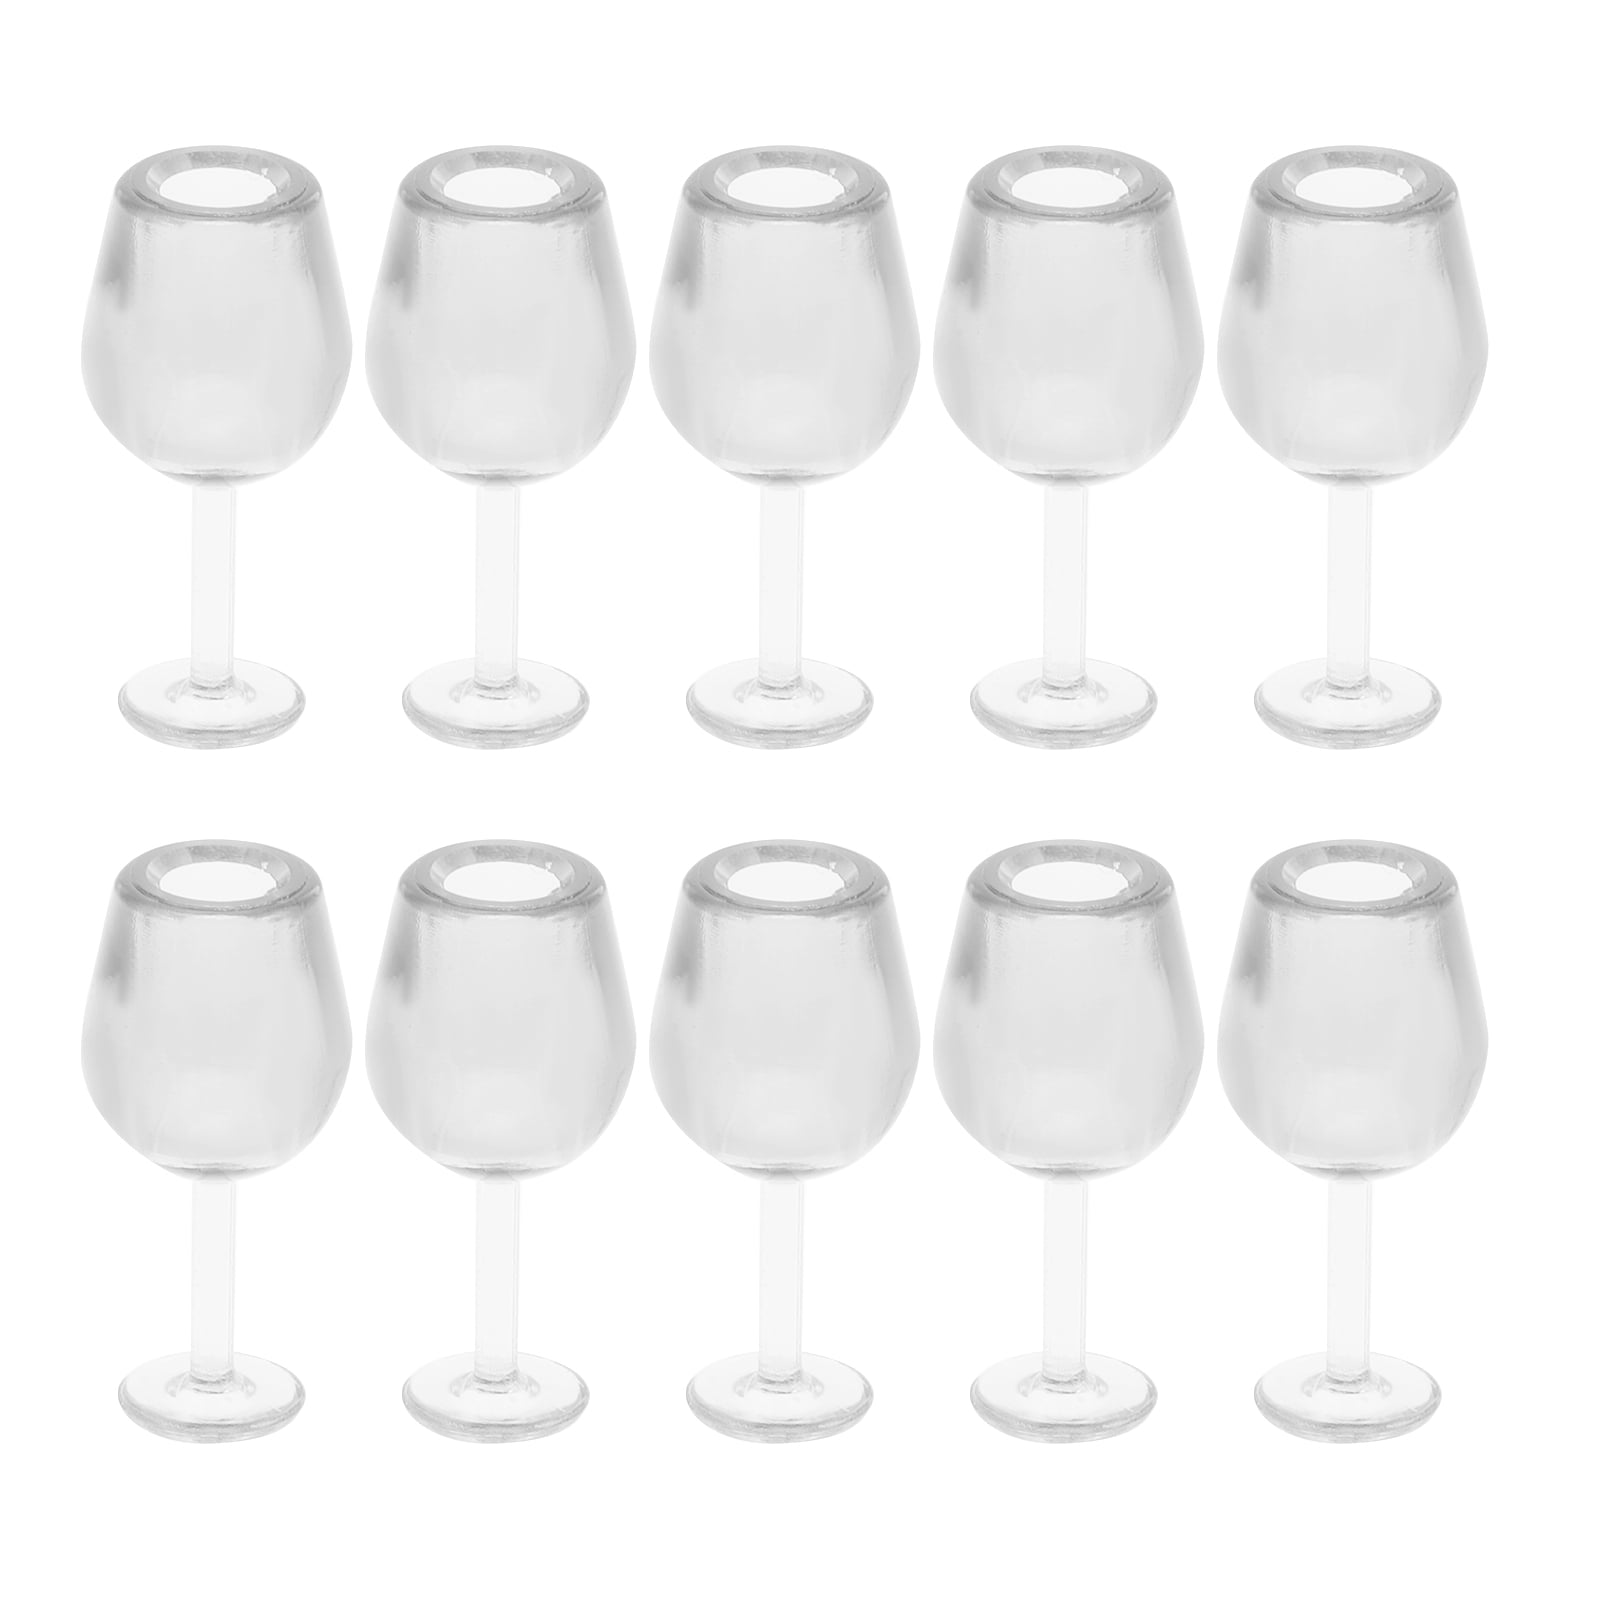 1 Inch Scale Assorted Wine Bottles and Glasses Set Dollhouse Miniature